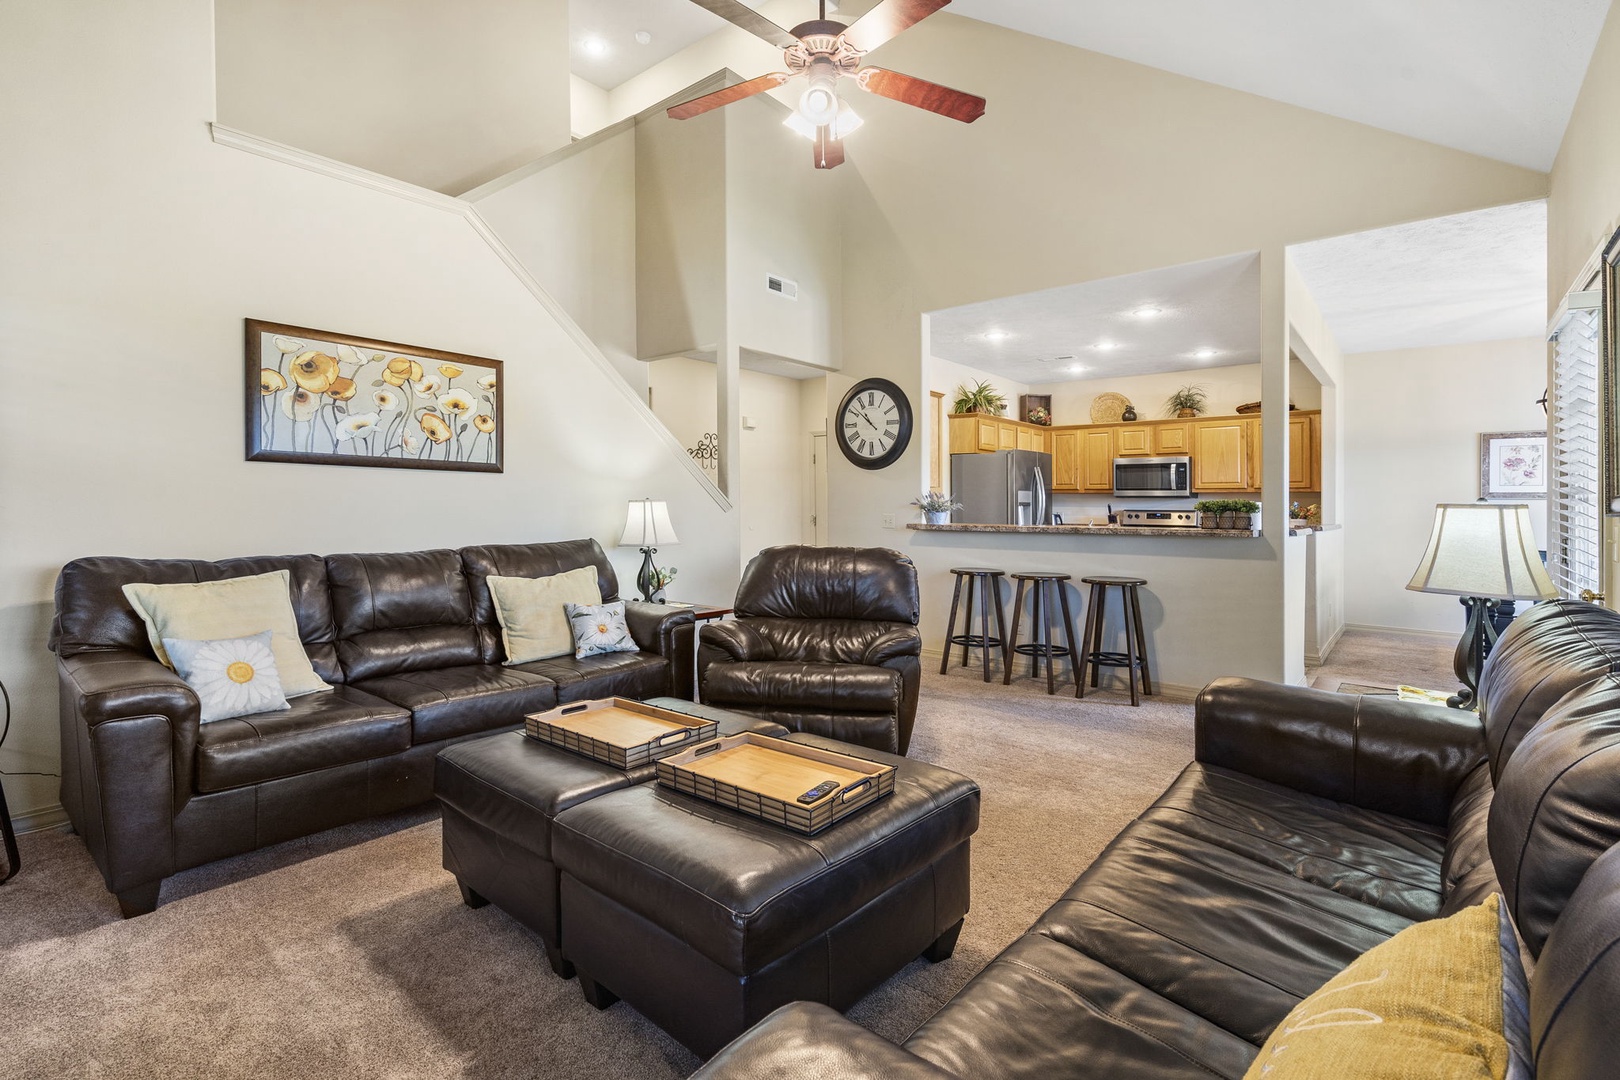 Open concept perfect for gathering and entertaining